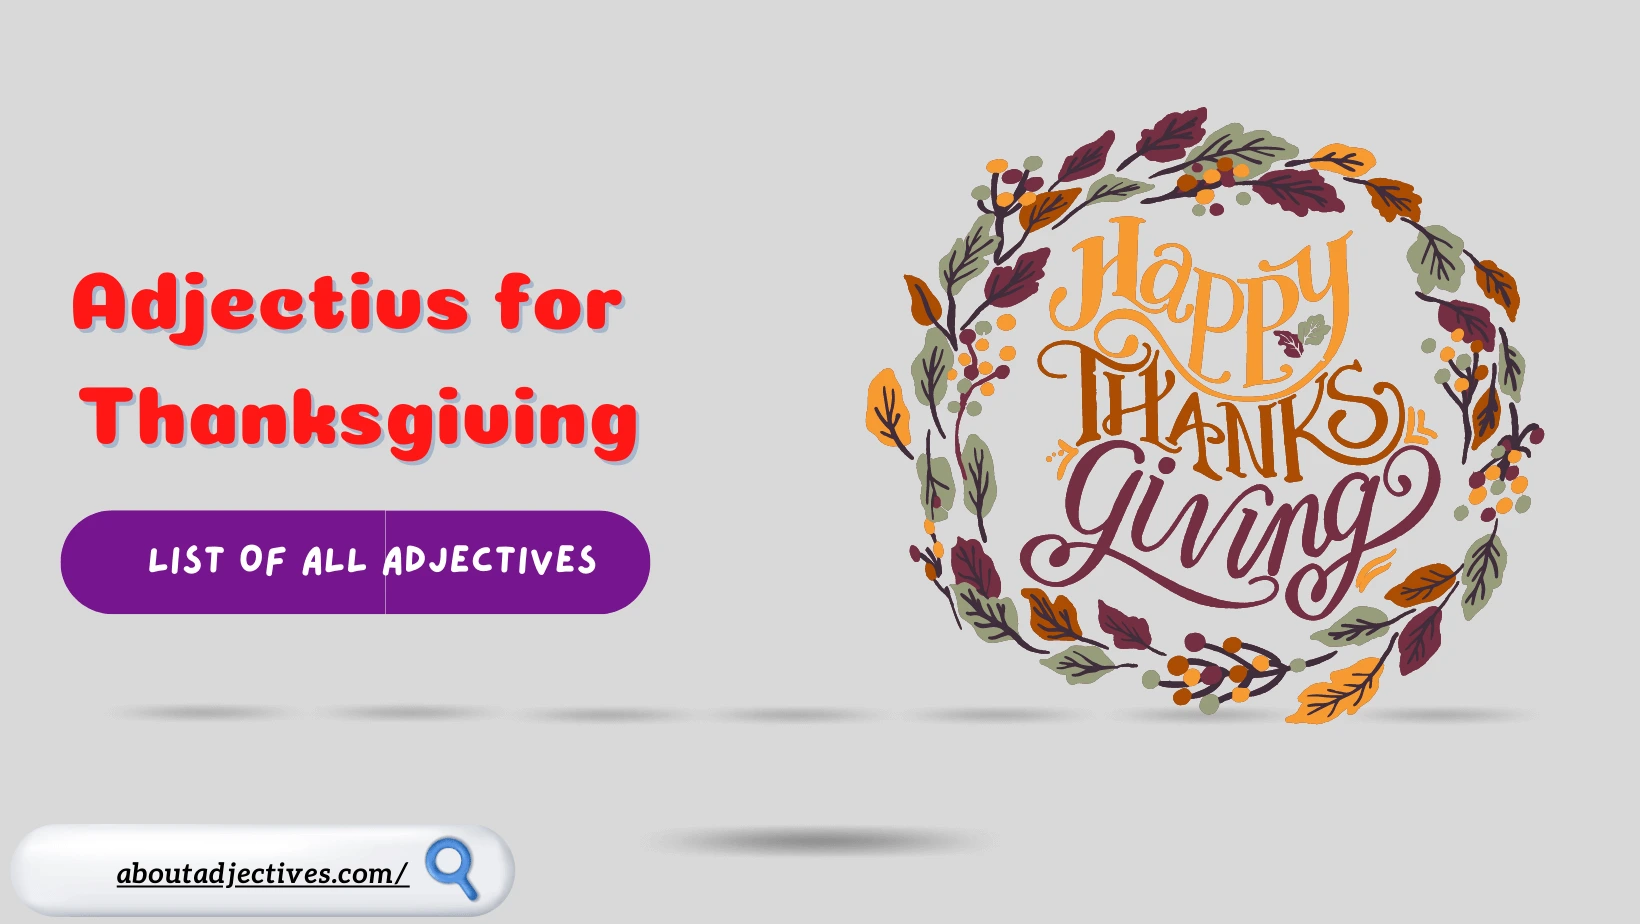 Adjectives for Thanksgiving